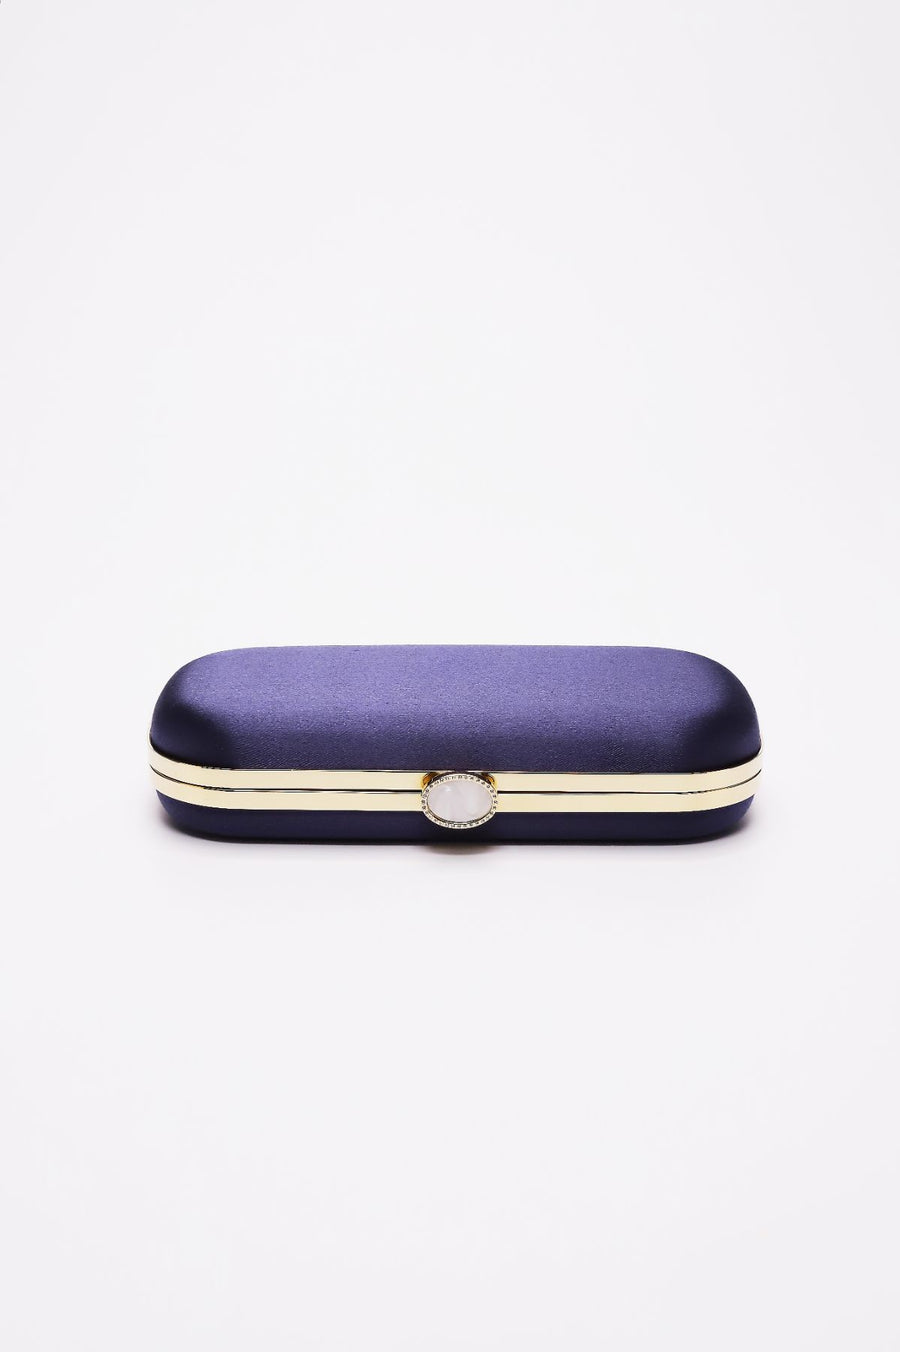 Top closed view of Bella Clutch in Navy Blue satin with silver hardware frame.